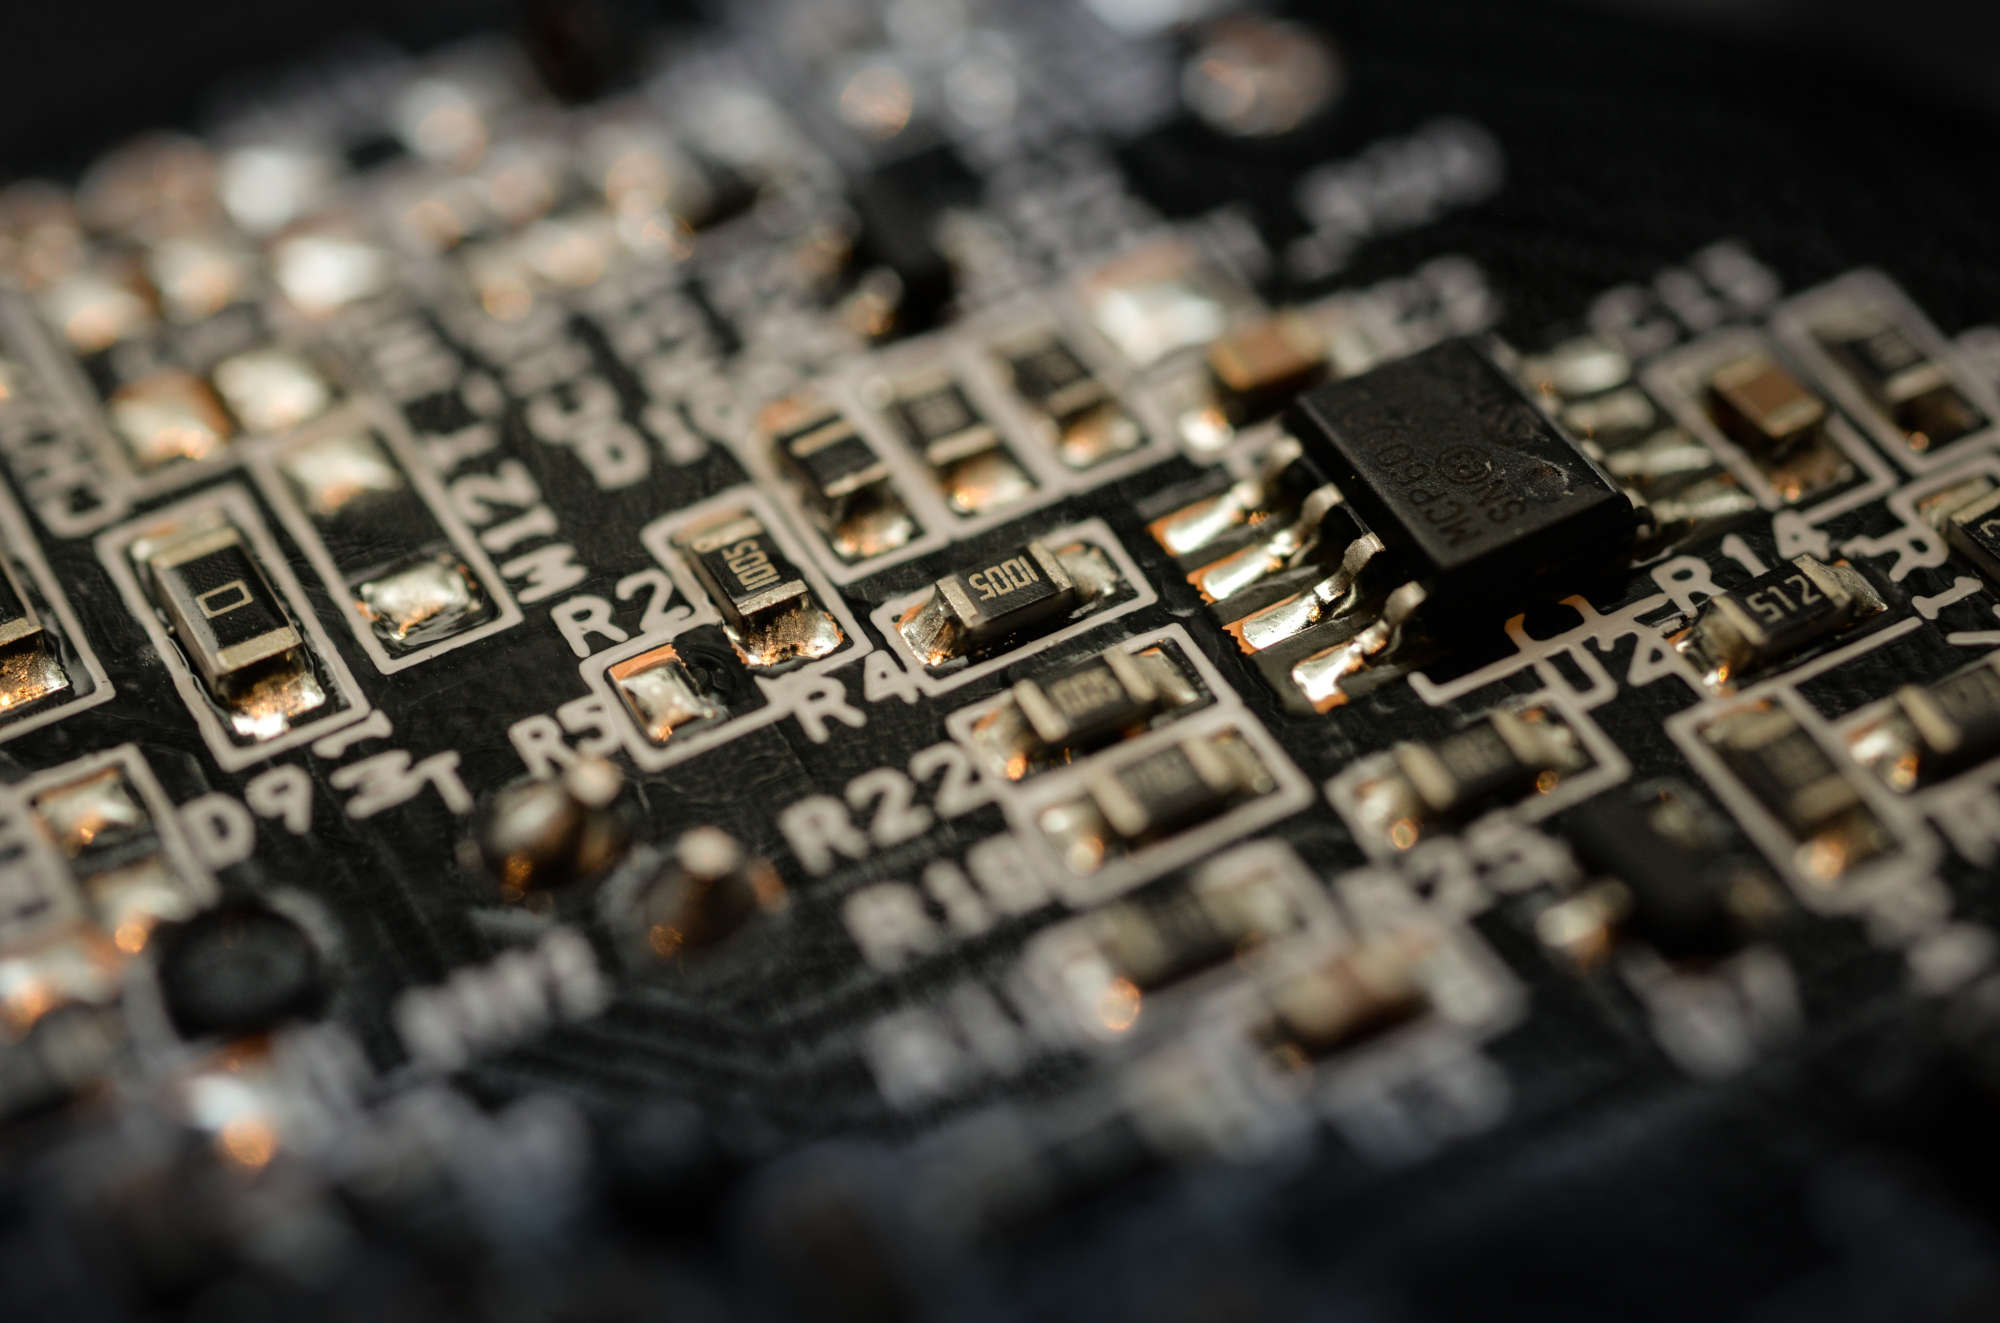 PCB and Hardware development for any electrical engineering project, focusing on RF.